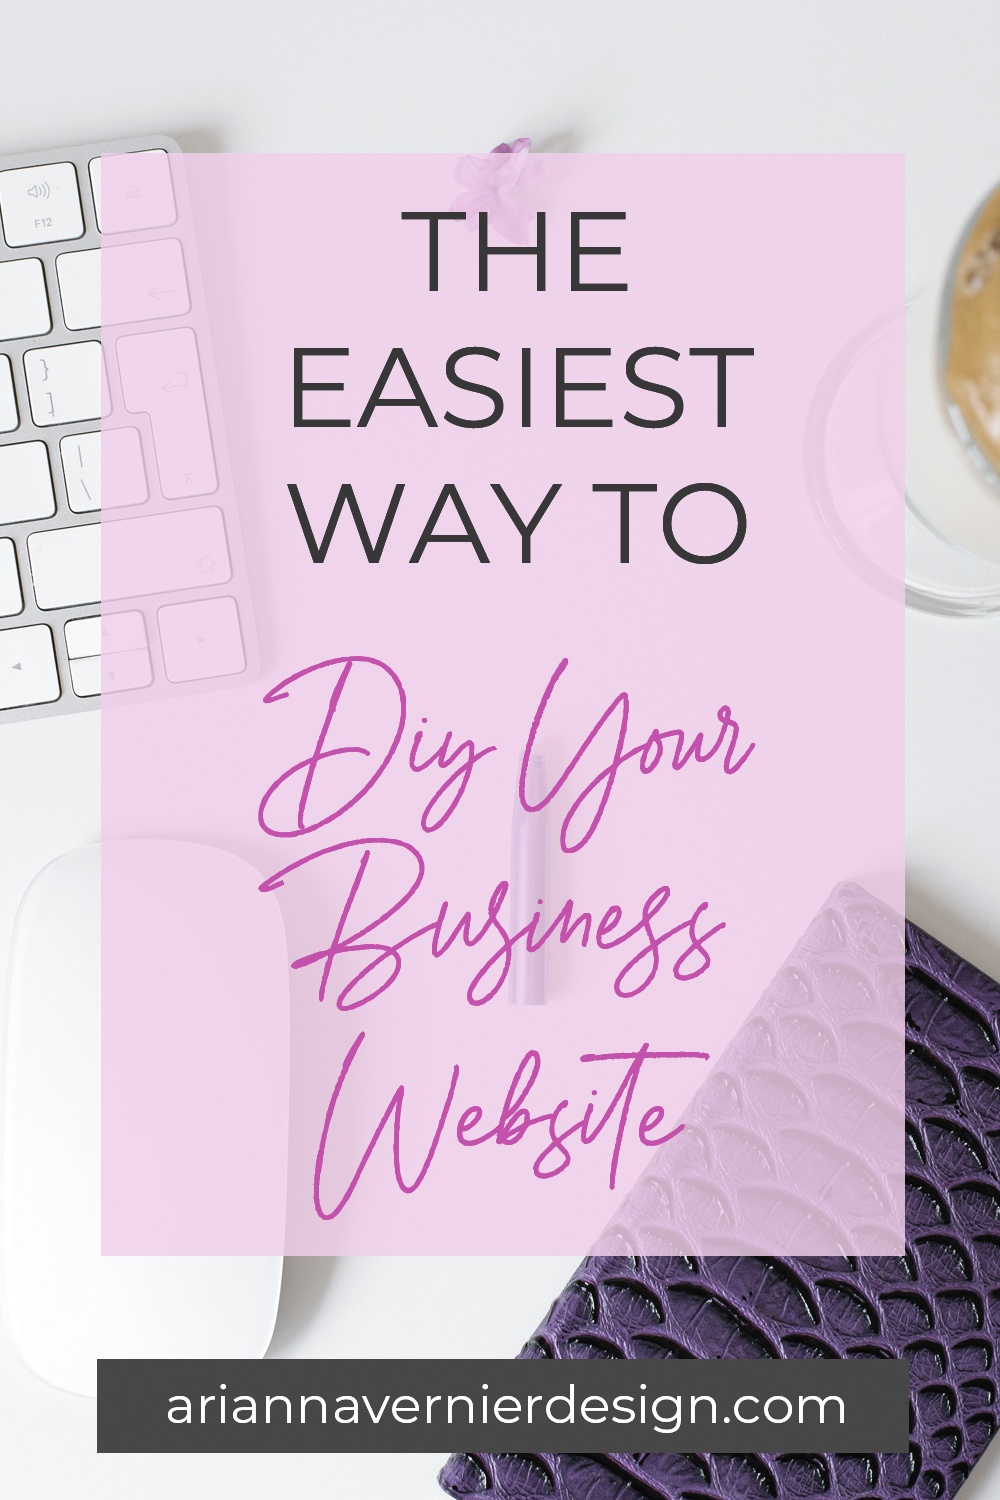 Pinterest pin with a desktop and office supplies in the background, with a light purple rectangle over top, and the title "The Easiest Way to DIY Your Business Website."